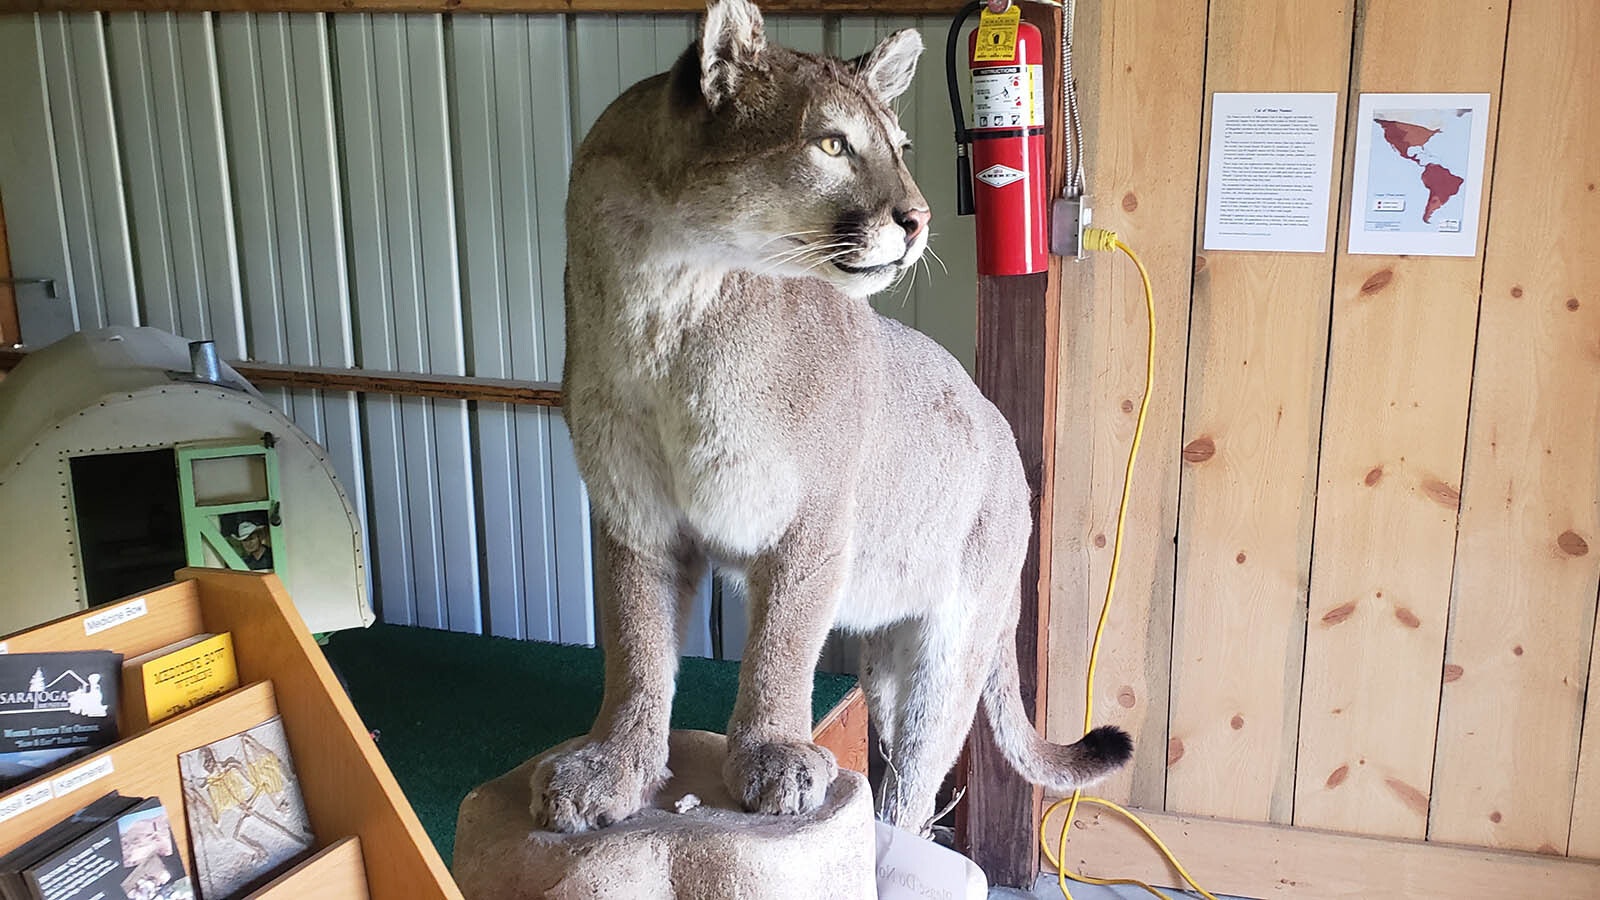 A mountain lion is among the many taxidermy animals on display at the Little Snake River Museum in Savery.